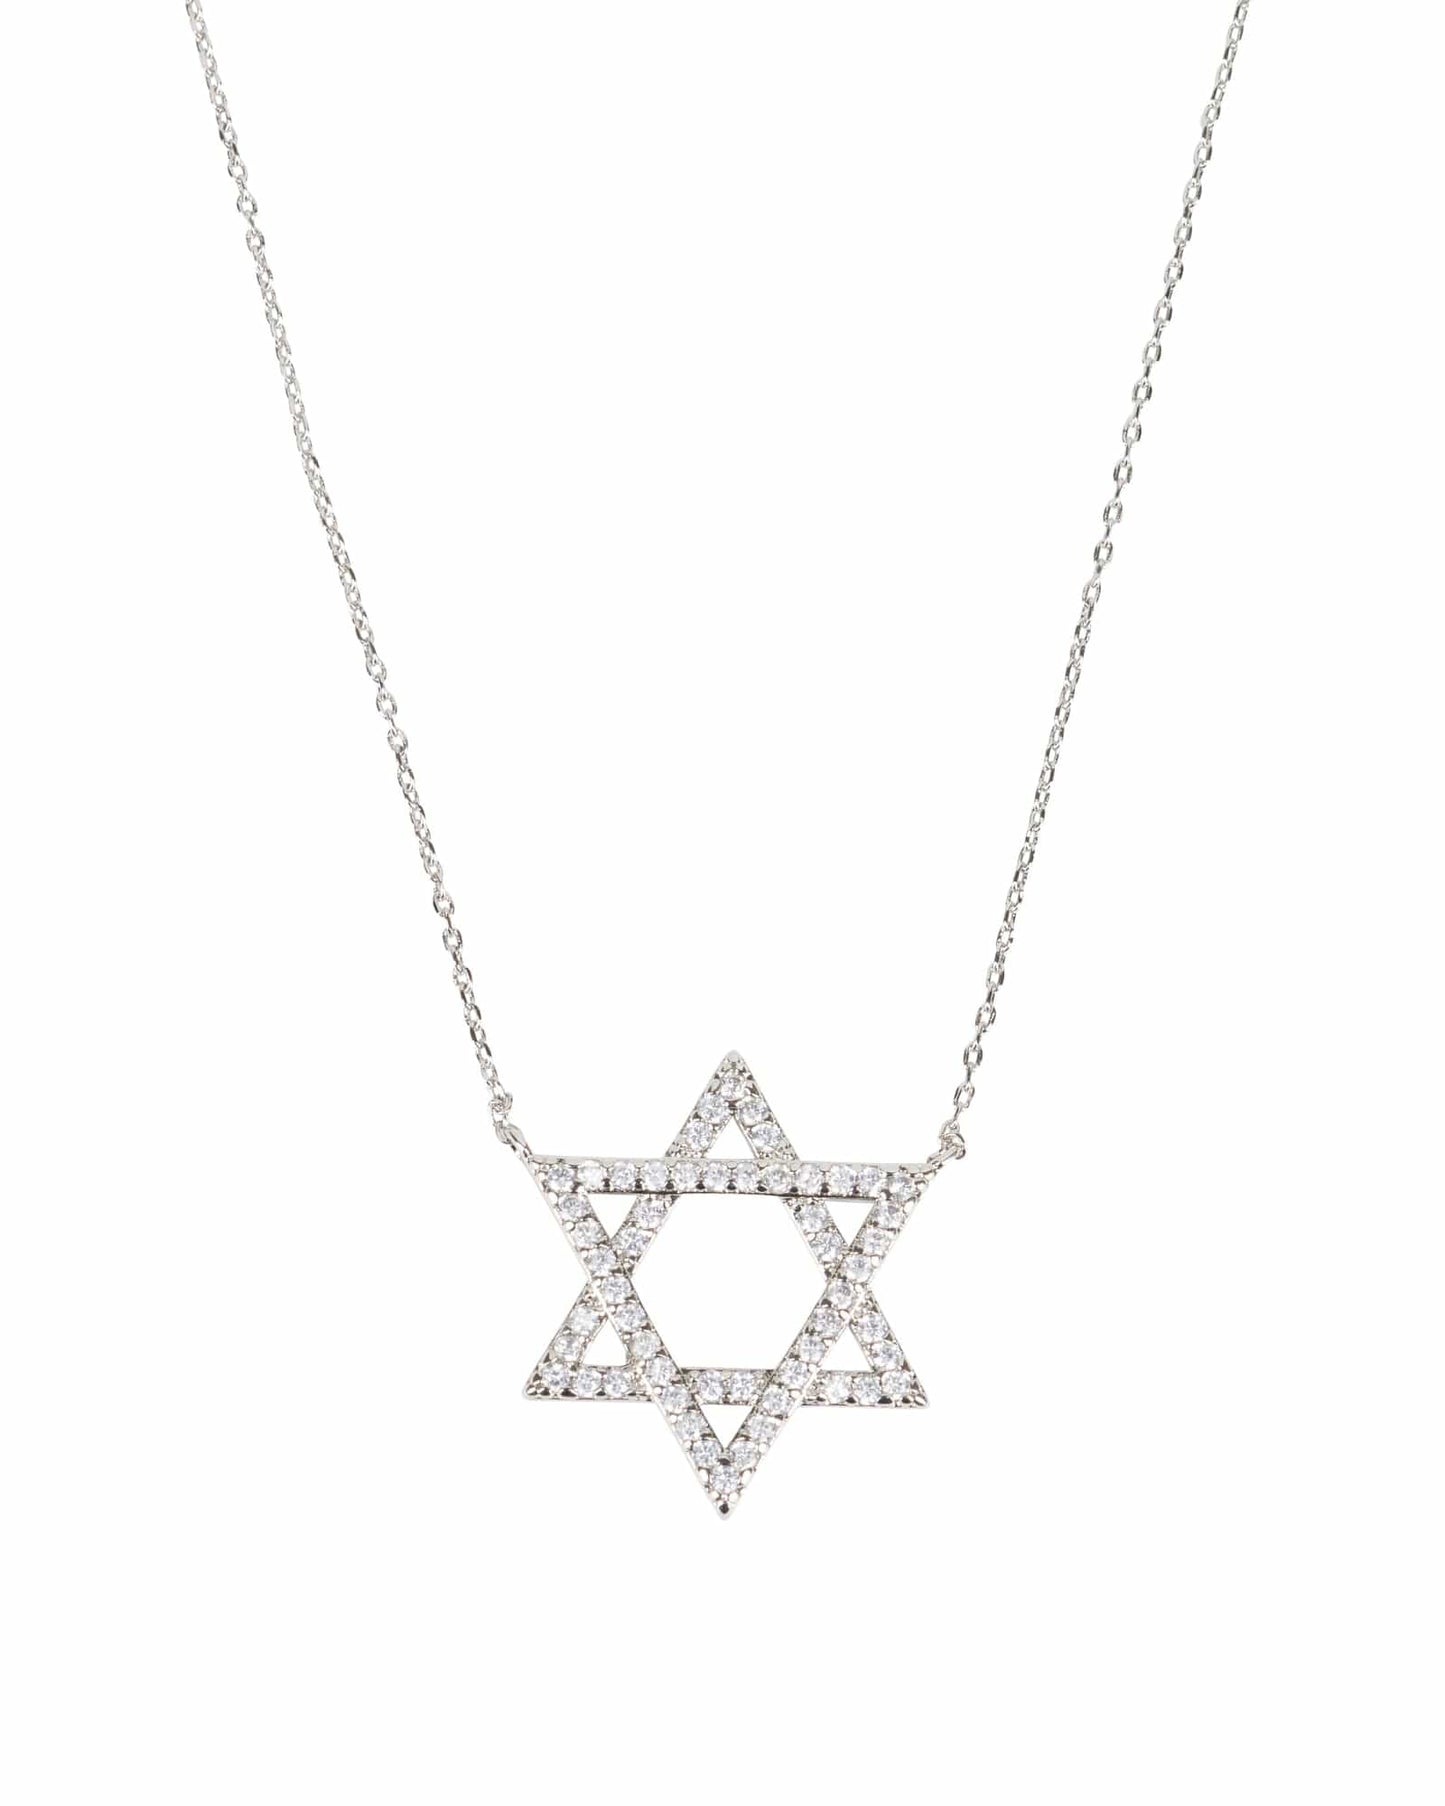 The Star of David Necklace